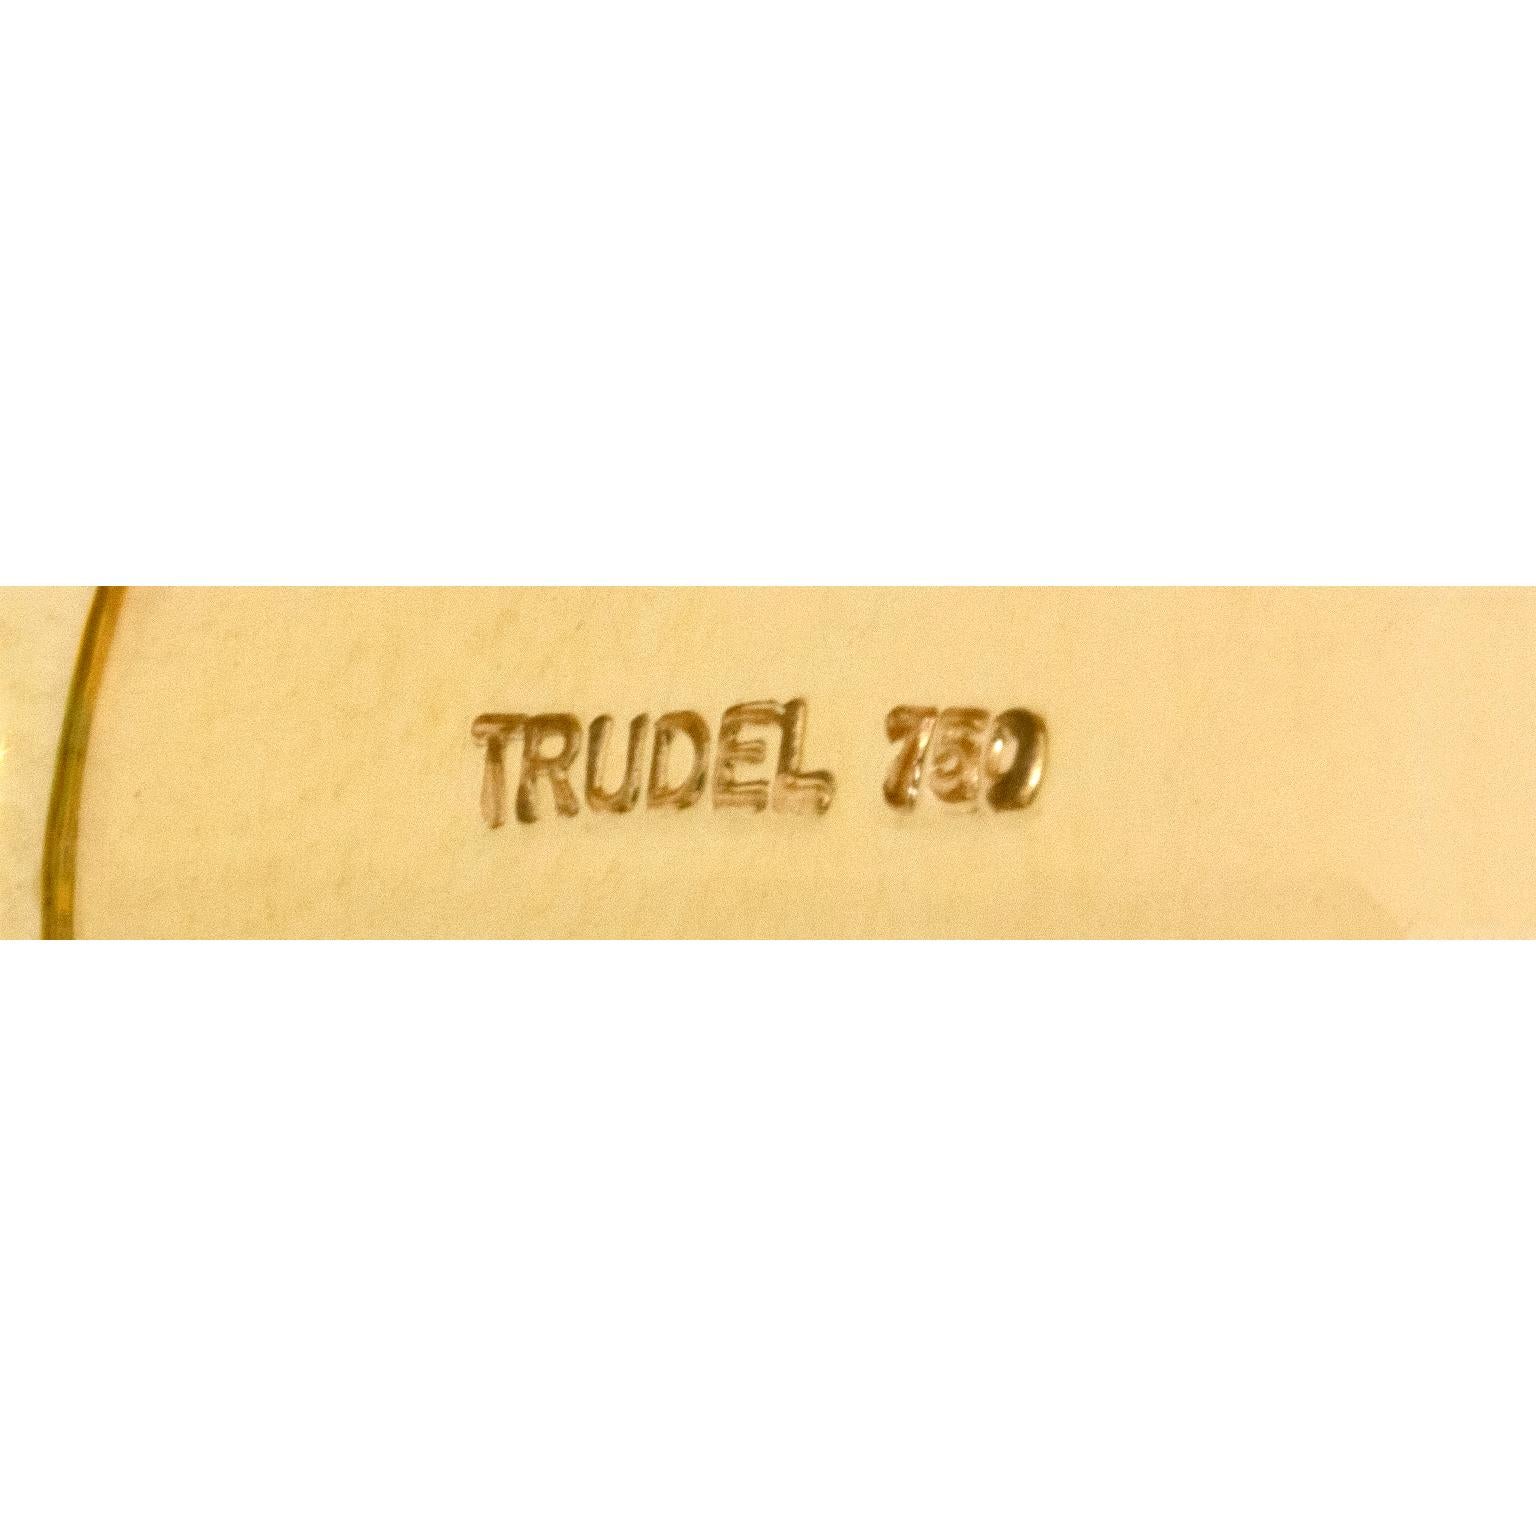 Trudel of Zurich Superbly Seventies Bracelet In Excellent Condition For Sale In Litchfield, CT